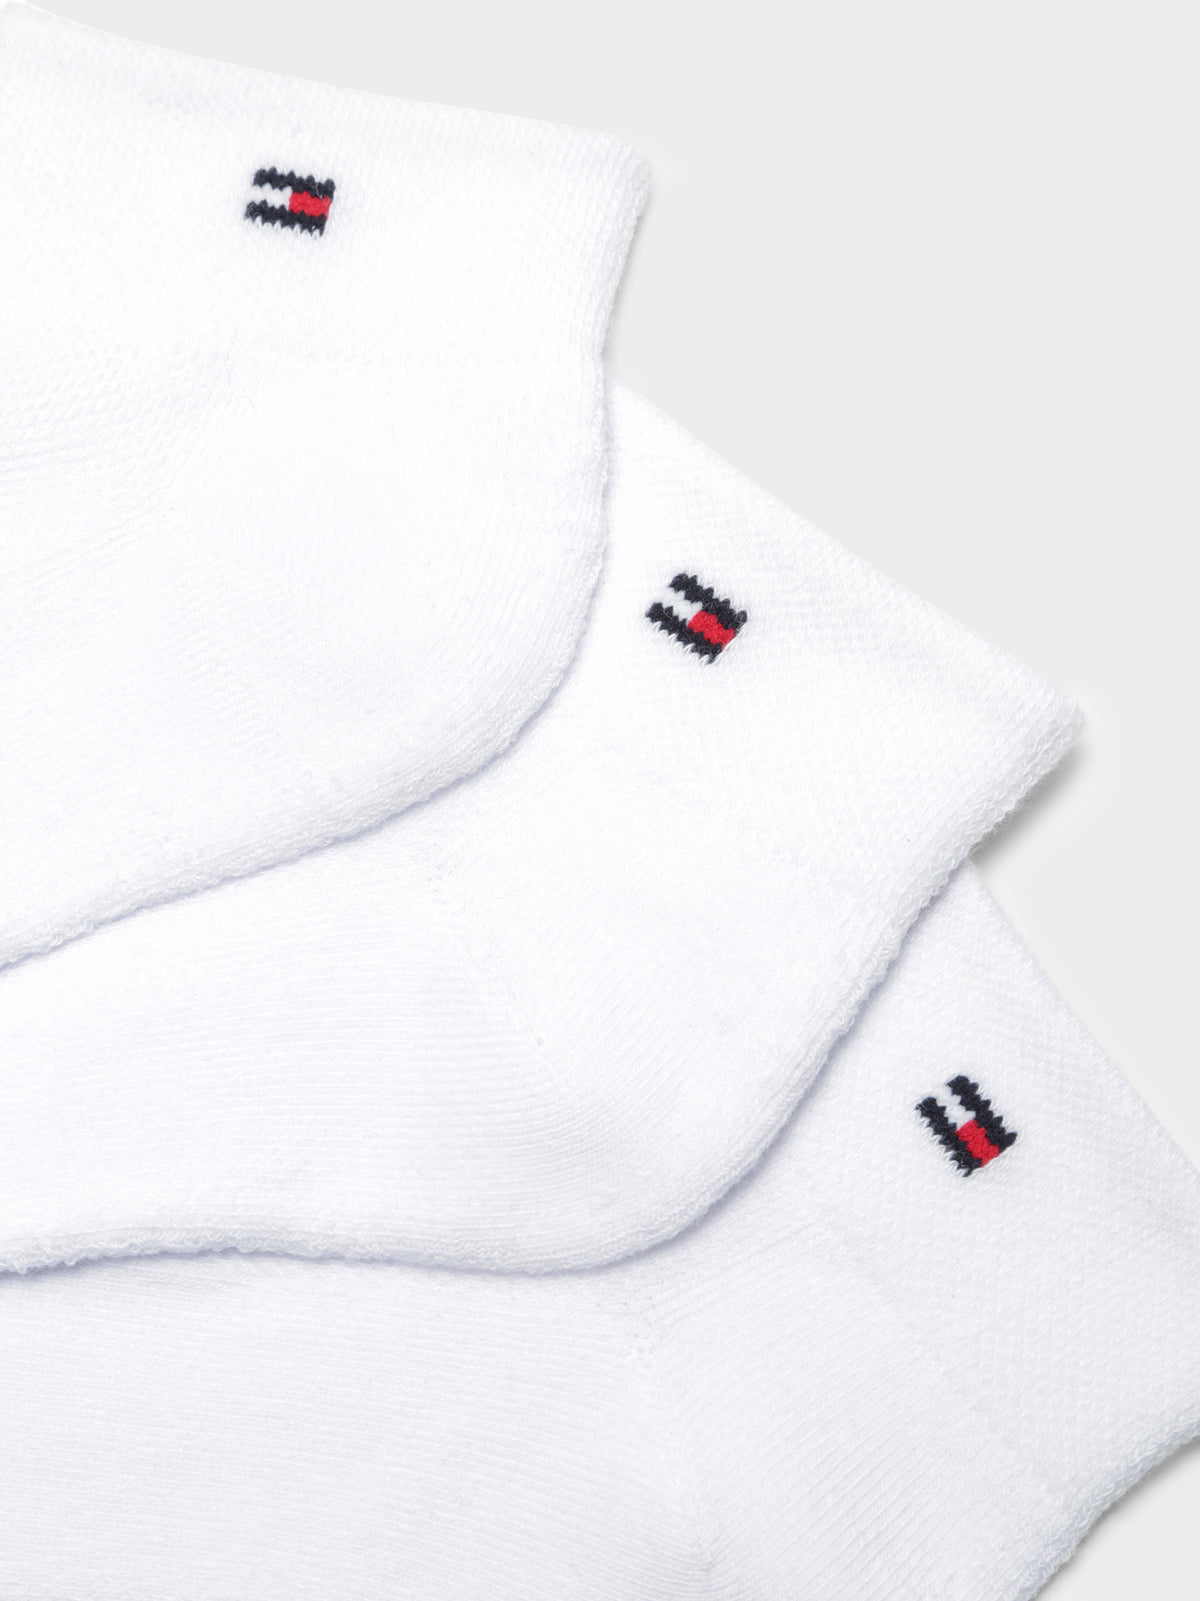 3 Pairs of Cushion Sole Socks in White